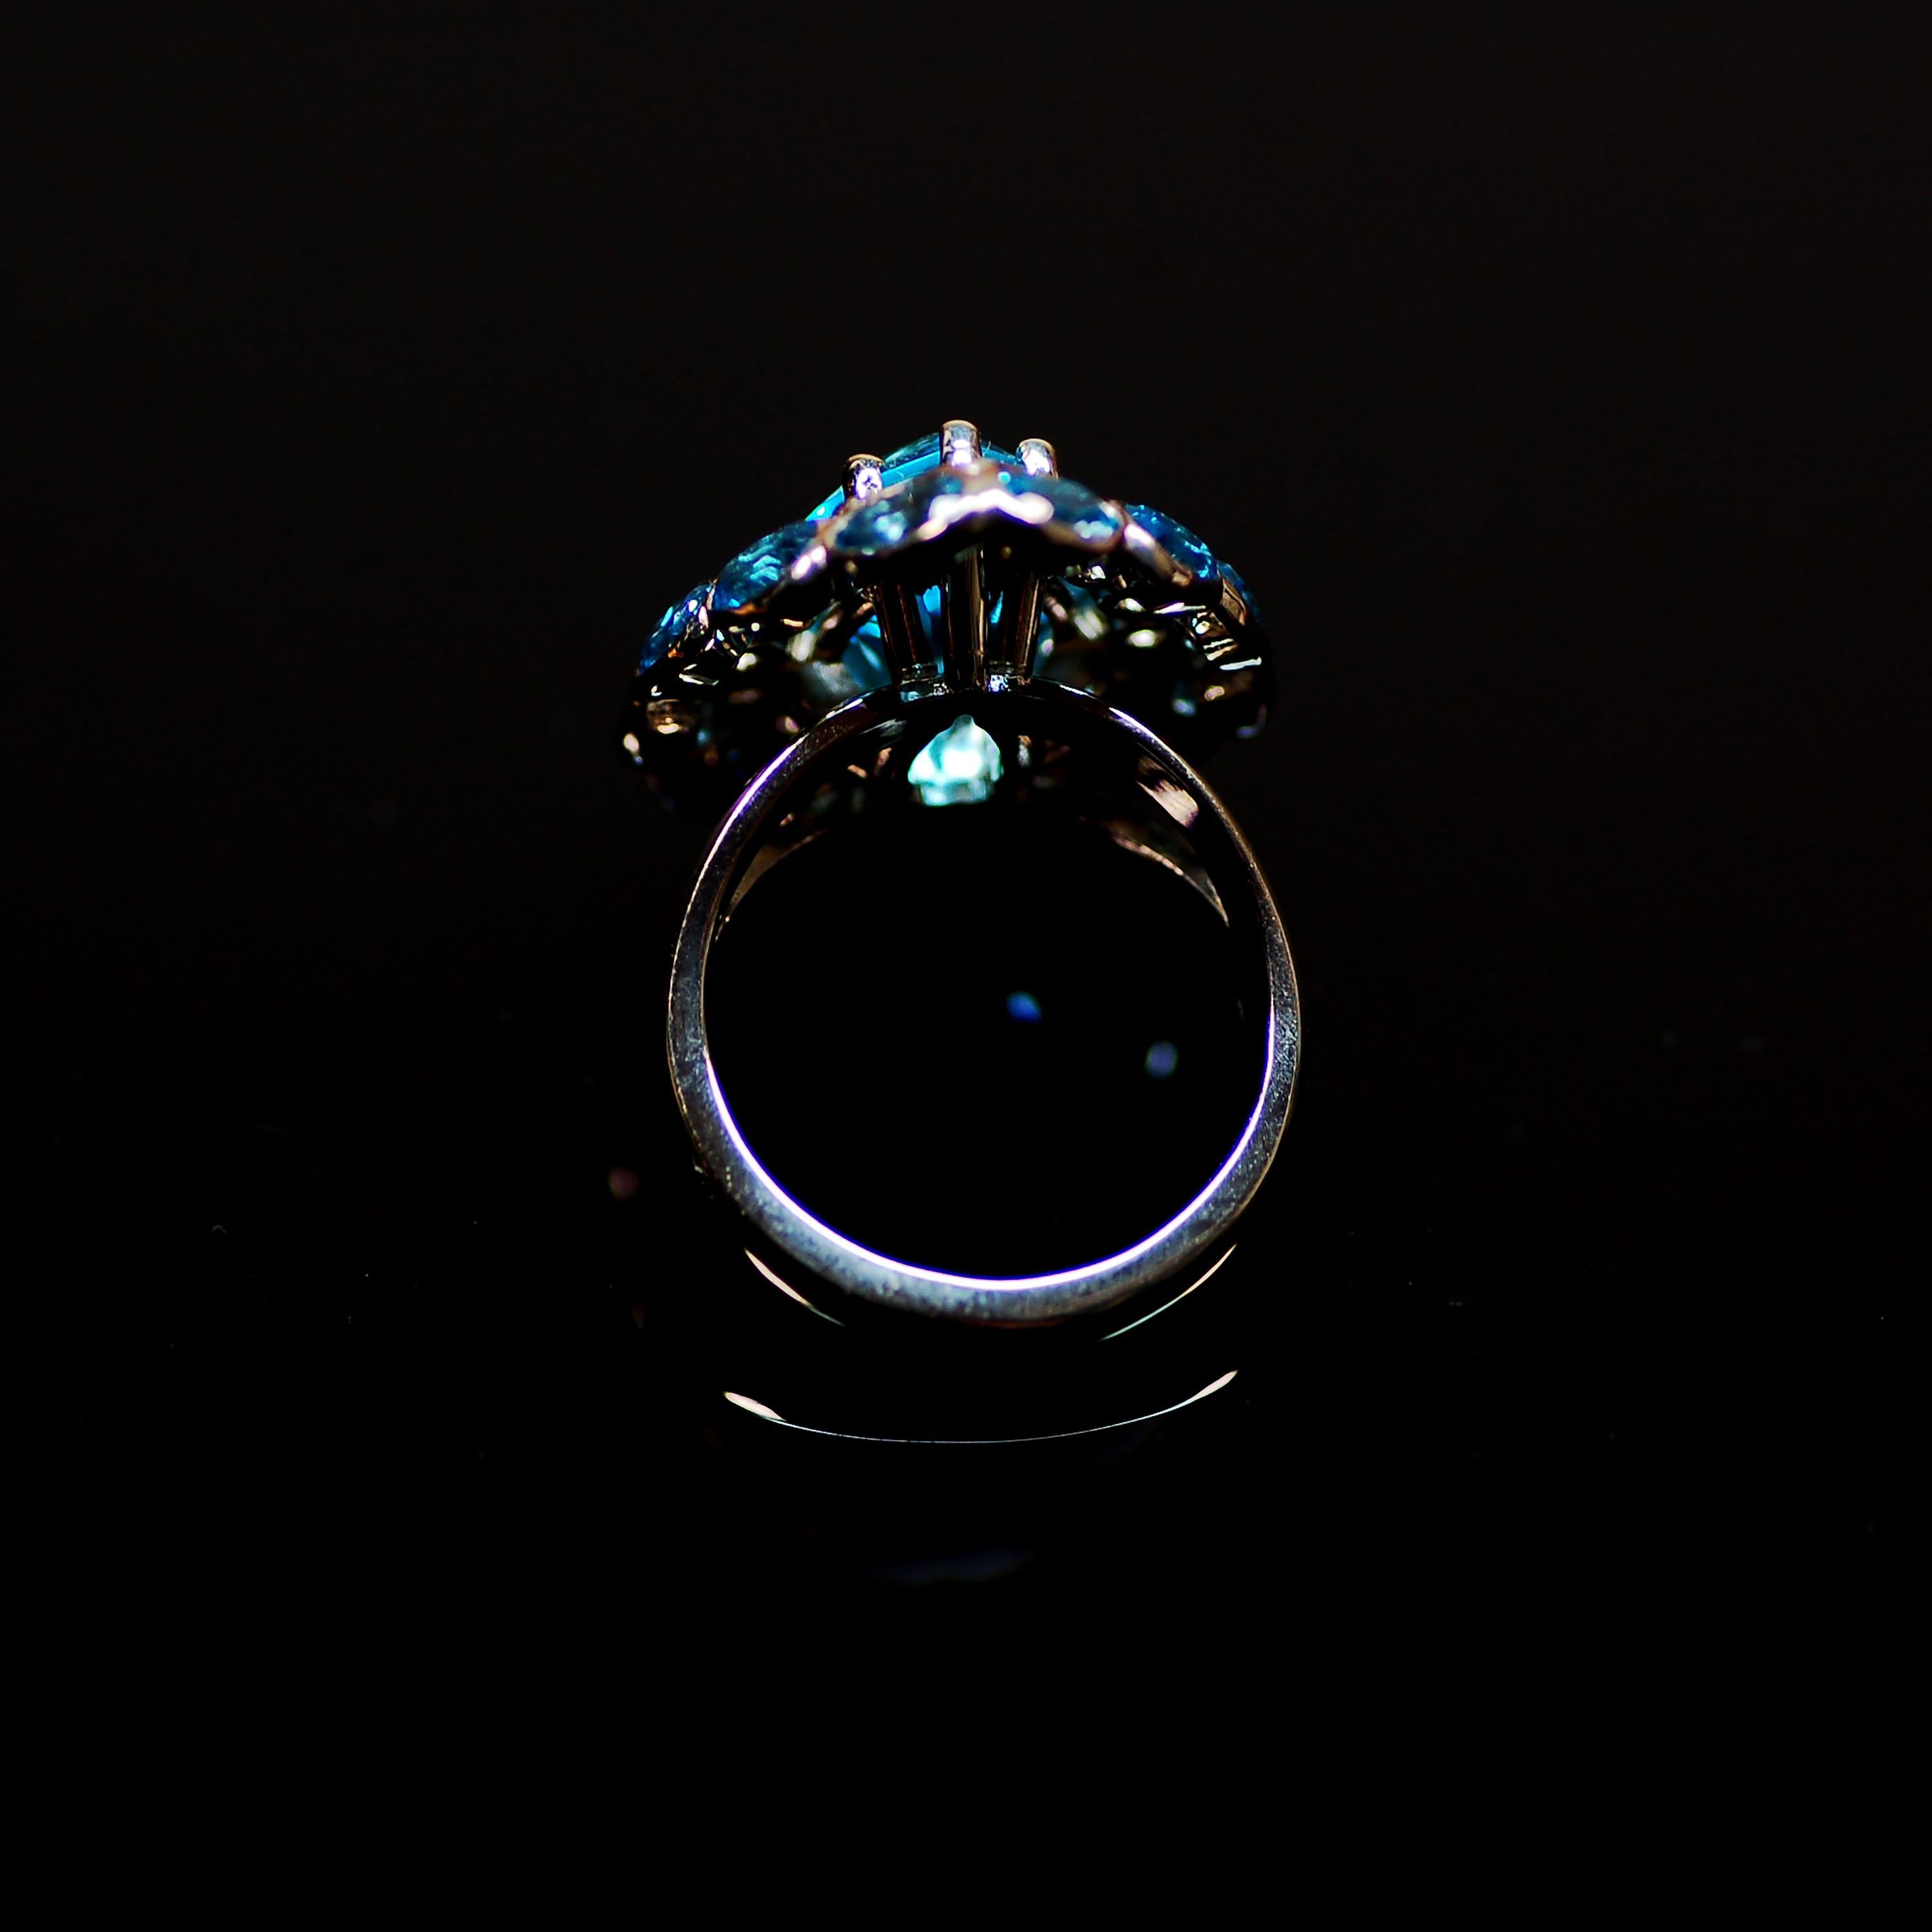 Large cocktail ring in 18K white gold set with aquamarines (15.6ctw), and diamonds (1.3ctw). A substantial piece for a person of confidence and refinement.

Styled after a ring belonging to George III (circa 19th century), this piece was created for